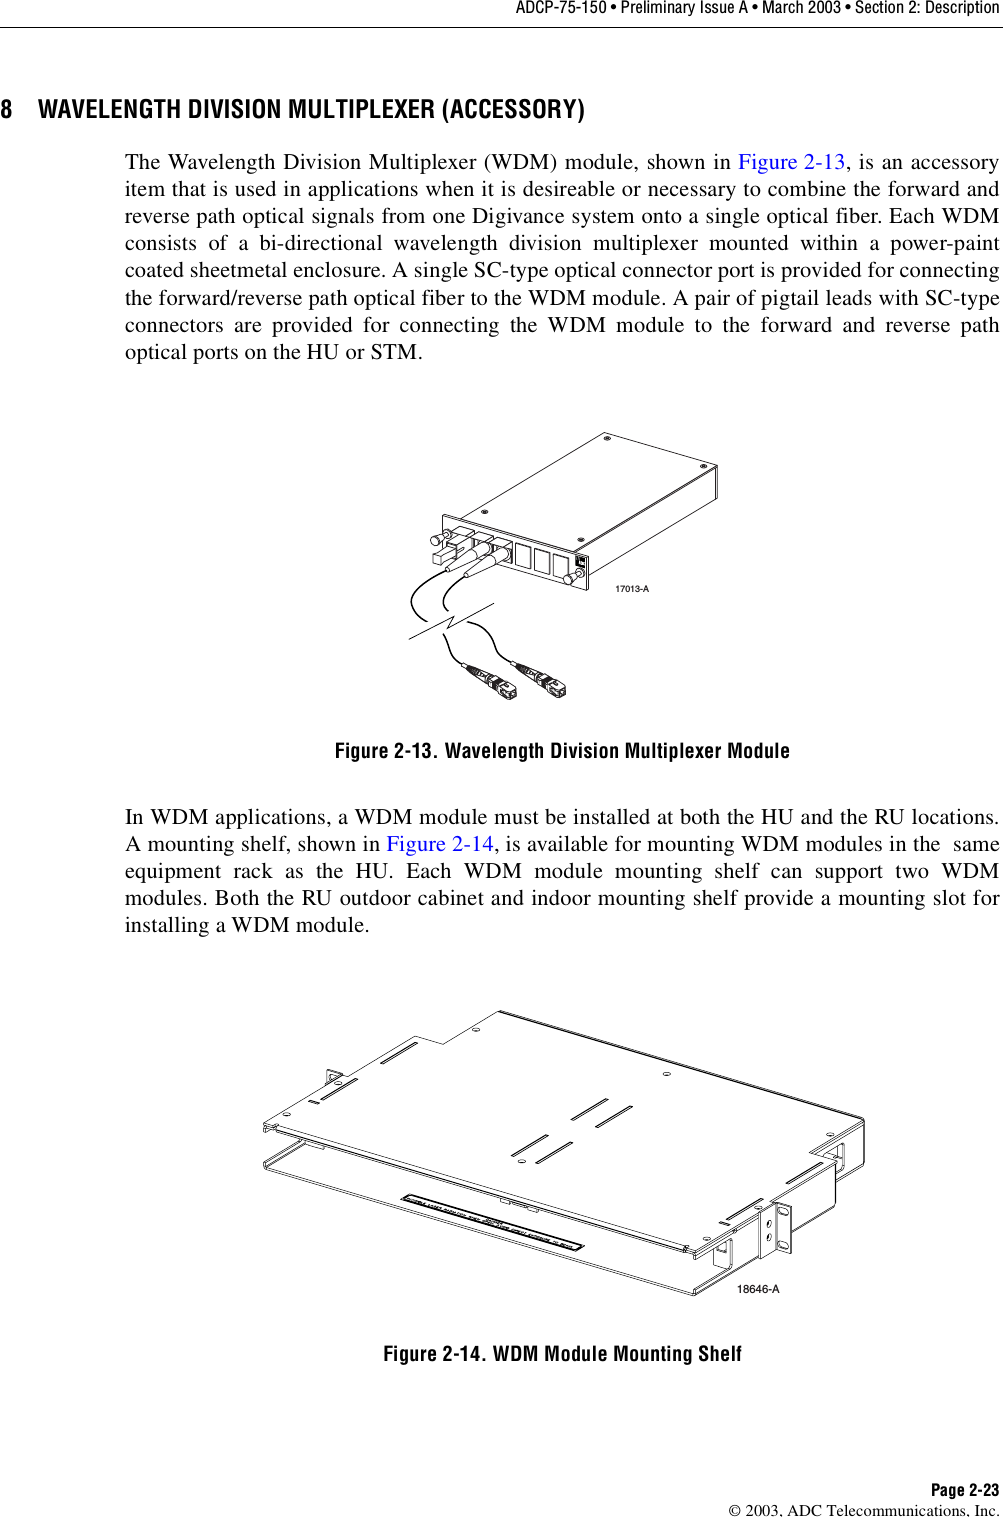 ADCP-75-150 • Preliminary Issue A • March 2003 • Section 2: DescriptionPage 2-23©2003, ADC Telecommunications, Inc.8 WAVELENGTH DIVISION MULTIPLEXER (ACCESSORY)The Wavelength Division Multiplexer (WDM) module, shown in Figure 2-13,is an accessoryitem that is used in applications when it is desireable or necessary to combine the forward andreverse path optical signals from one Digivance system onto asingle optical fiber. Each WDMconsists of abi-directional wavelength division multiplexer mounted within apower-paintcoated sheetmetal enclosure. Asingle SC-type optical connector port is provided for connectingthe forward/reverse path optical fiber to the WDM module. Apair of pigtail leads with SC-typeconnectors are provided for connecting the WDM module to the forward and reverse pathoptical ports on the HU or STM.Figure 2-13. Wavelength Division Multiplexer ModuleIn WDM applications, aWDM module must be installed at both the HU and the RU locations.Amounting shelf, shown in Figure 2-14,is available for mounting WDM modules in the sameequipment rack as the HU. Each WDM module mounting shelf can support two WDMmodules. Both the RU outdoor cabinet and indoor mounting shelf provide amounting slot forinstalling aWDM module.Figure 2-14. WDM Module Mounting Shelf17013-A18646-A